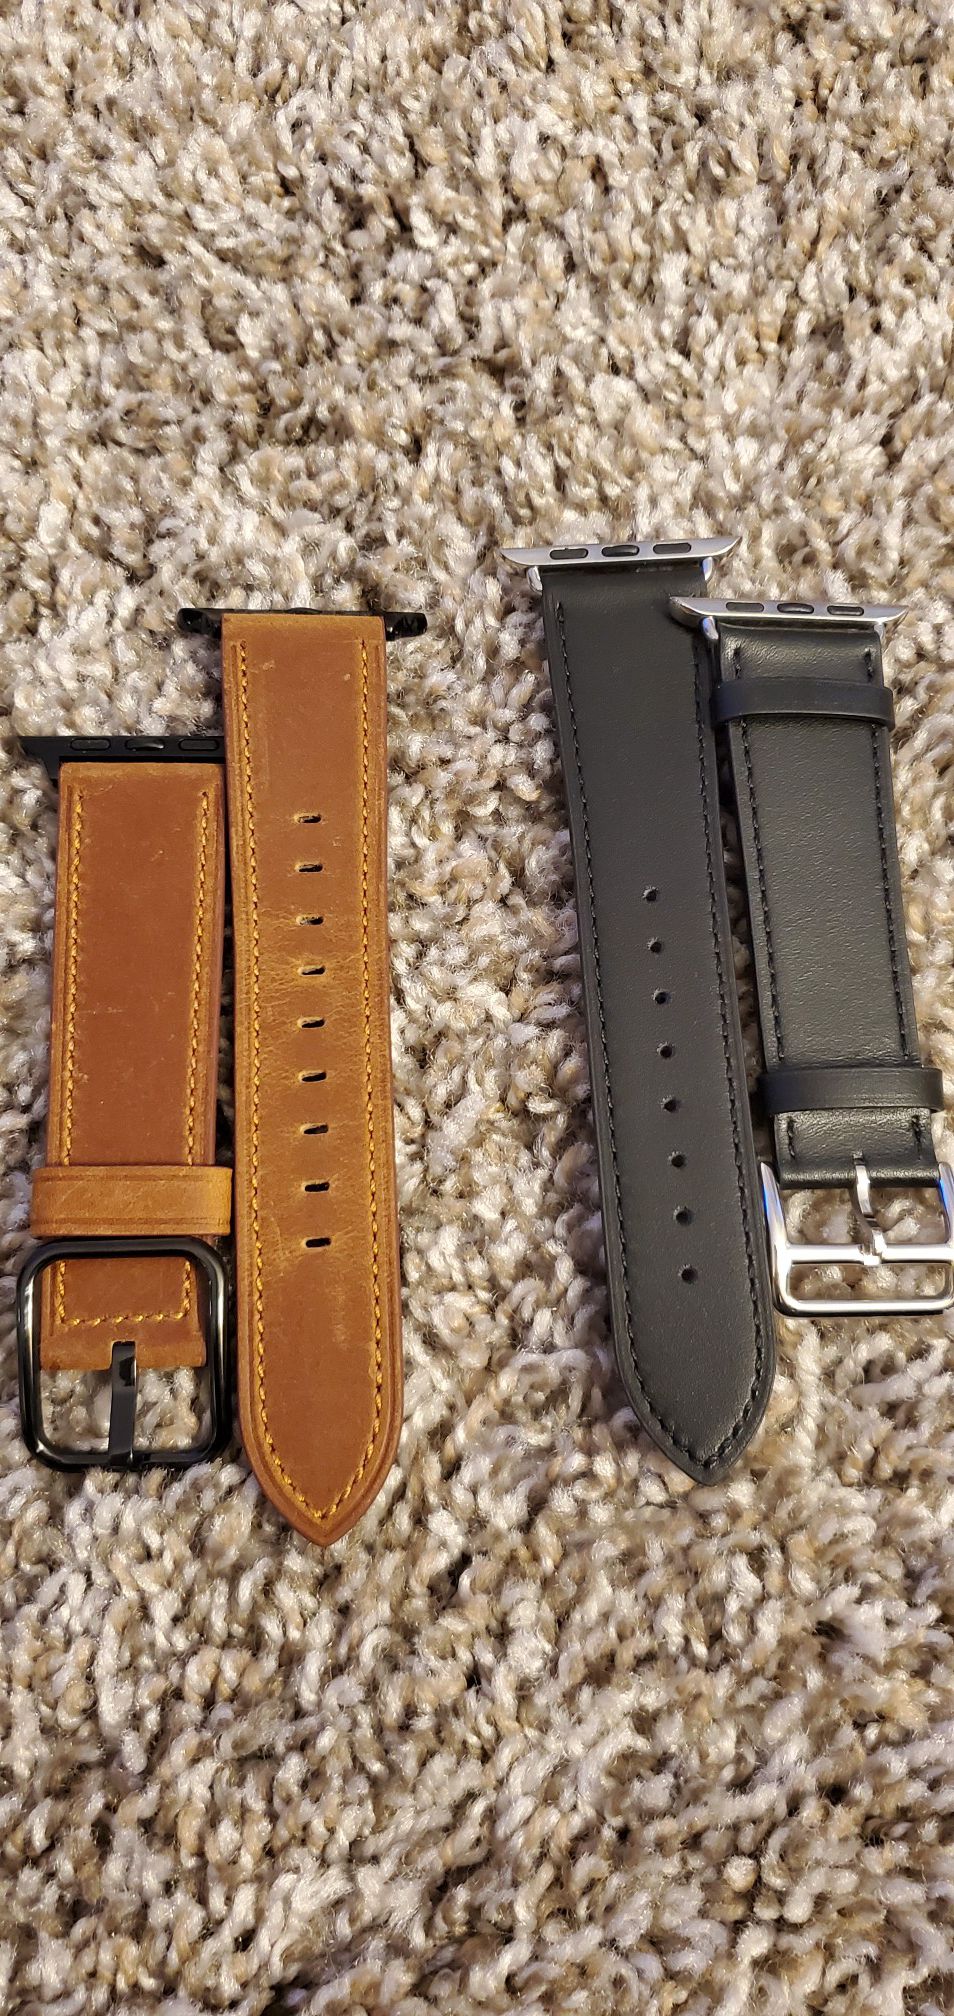 New Apple watch 5 bands. 4 for $20